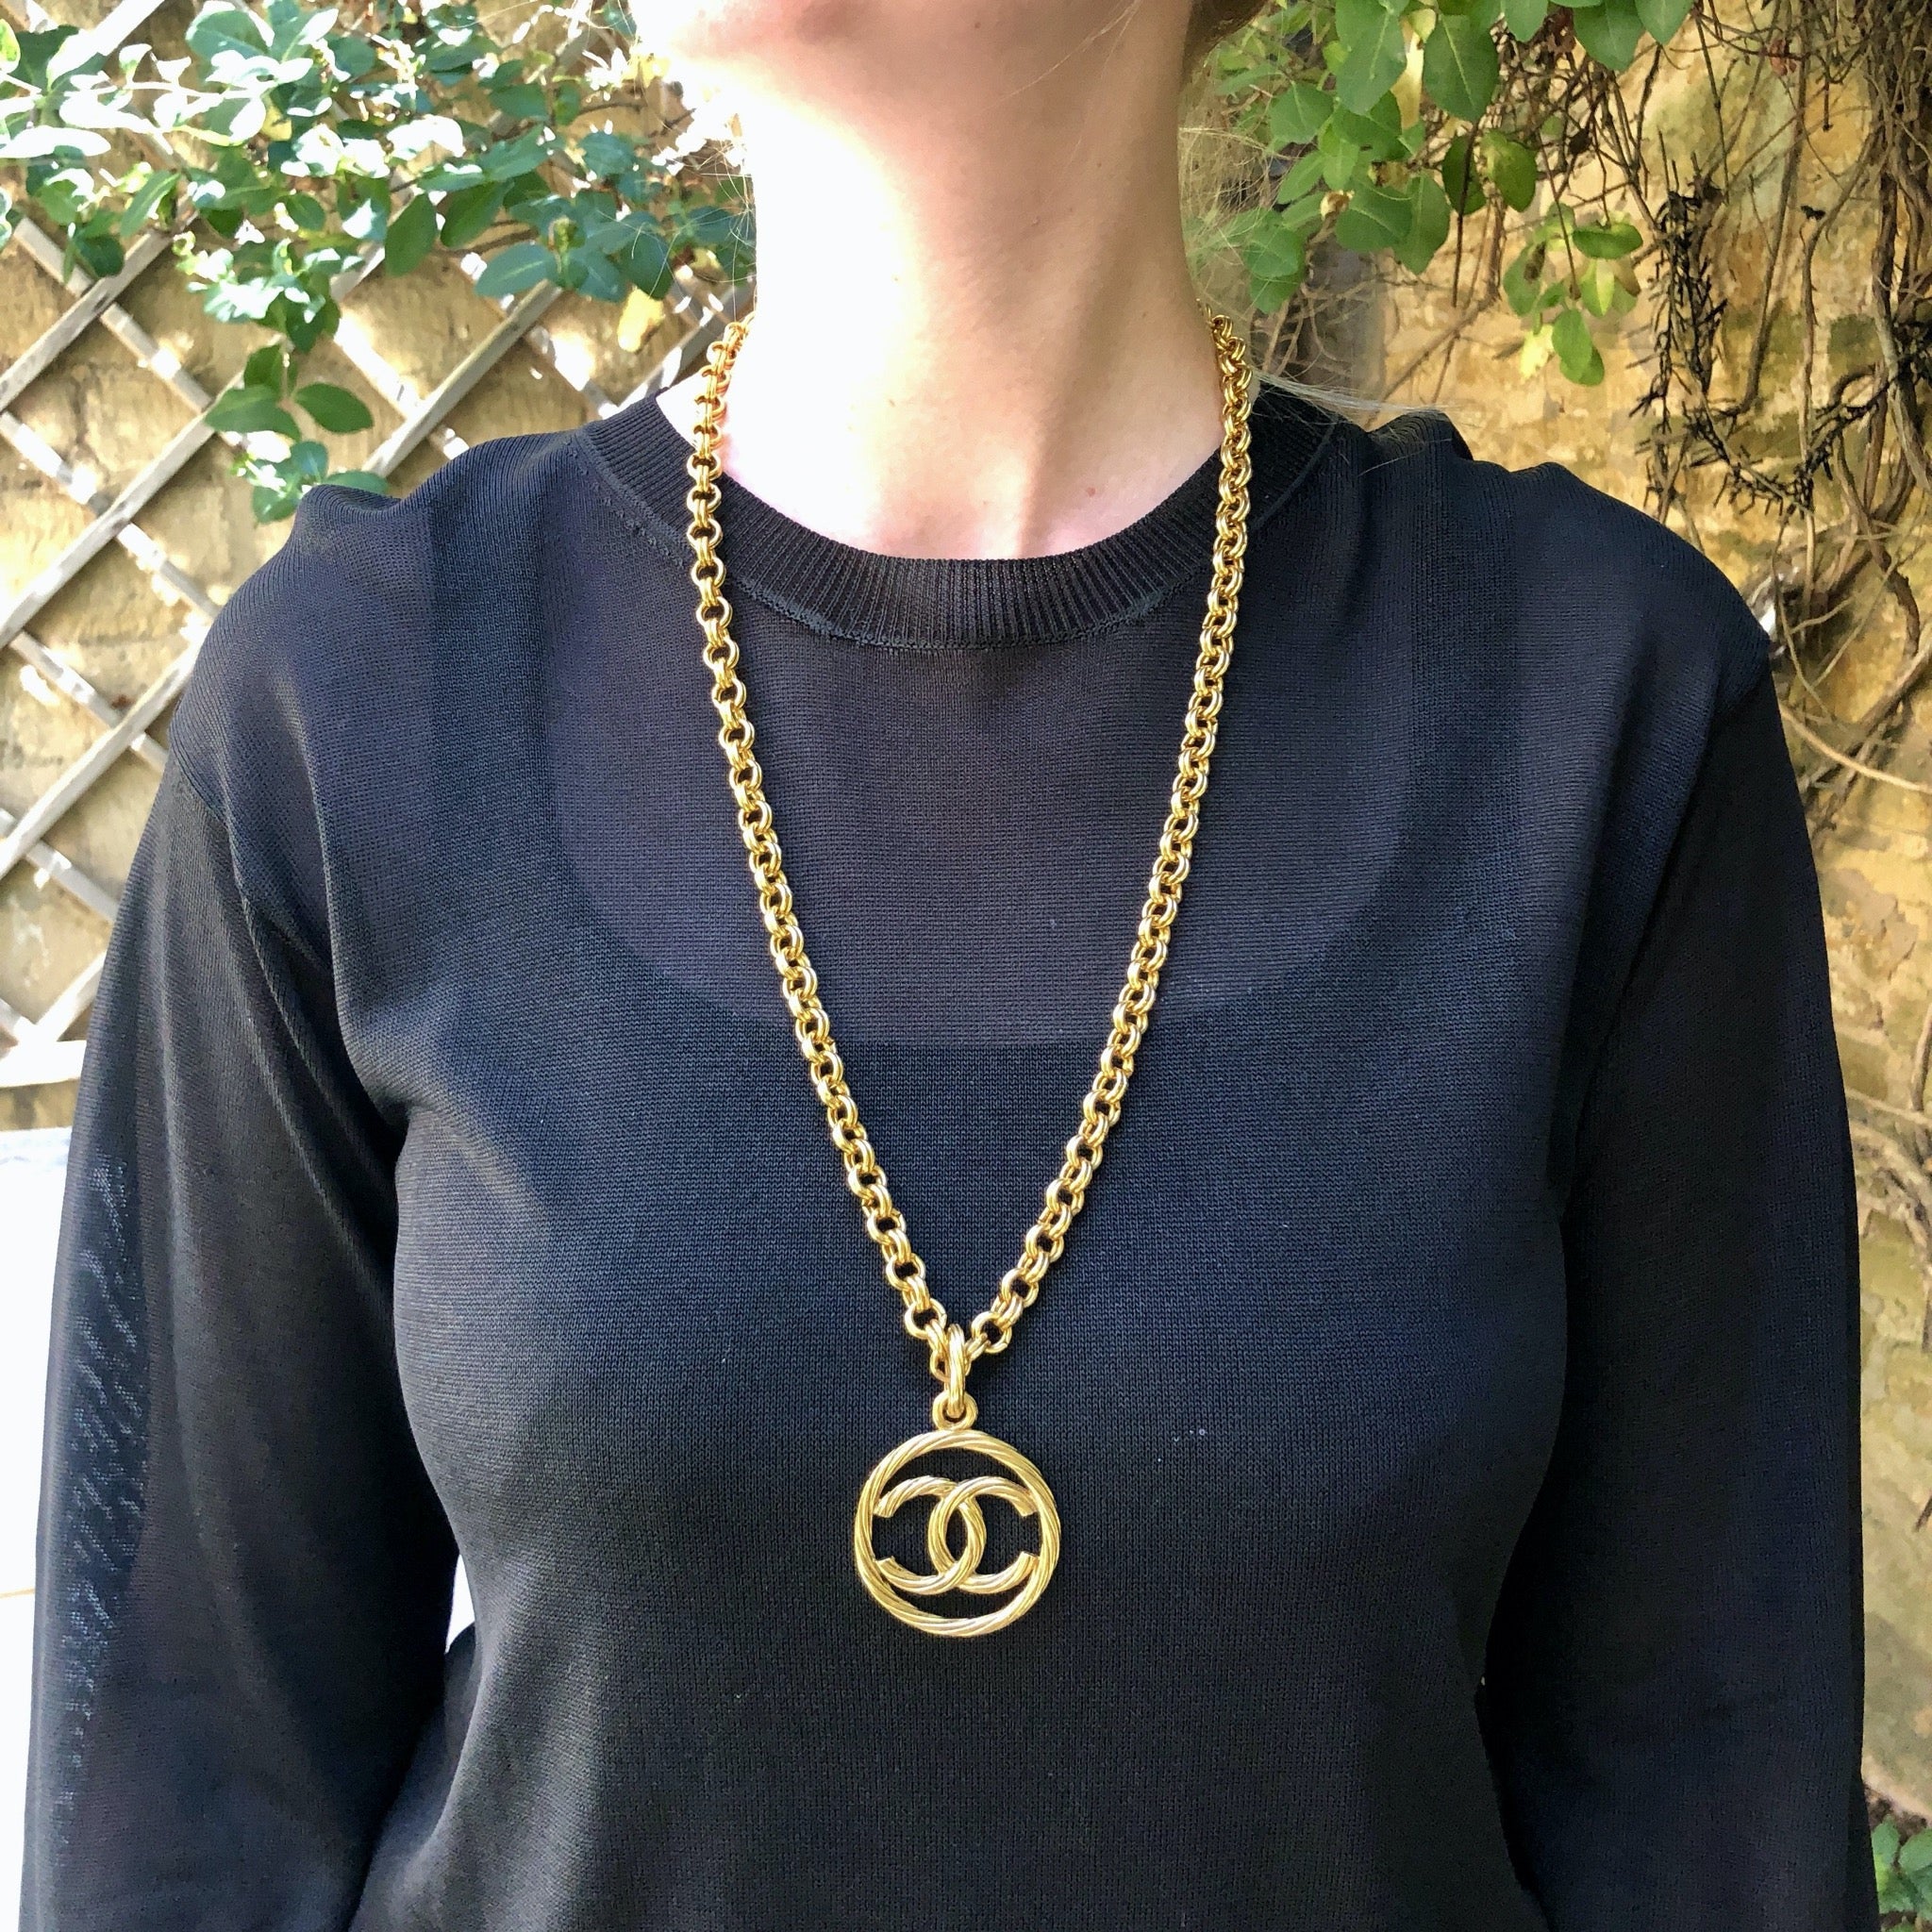 Vintage Chanel Necklace with Round CC Pendant – Very Vintage